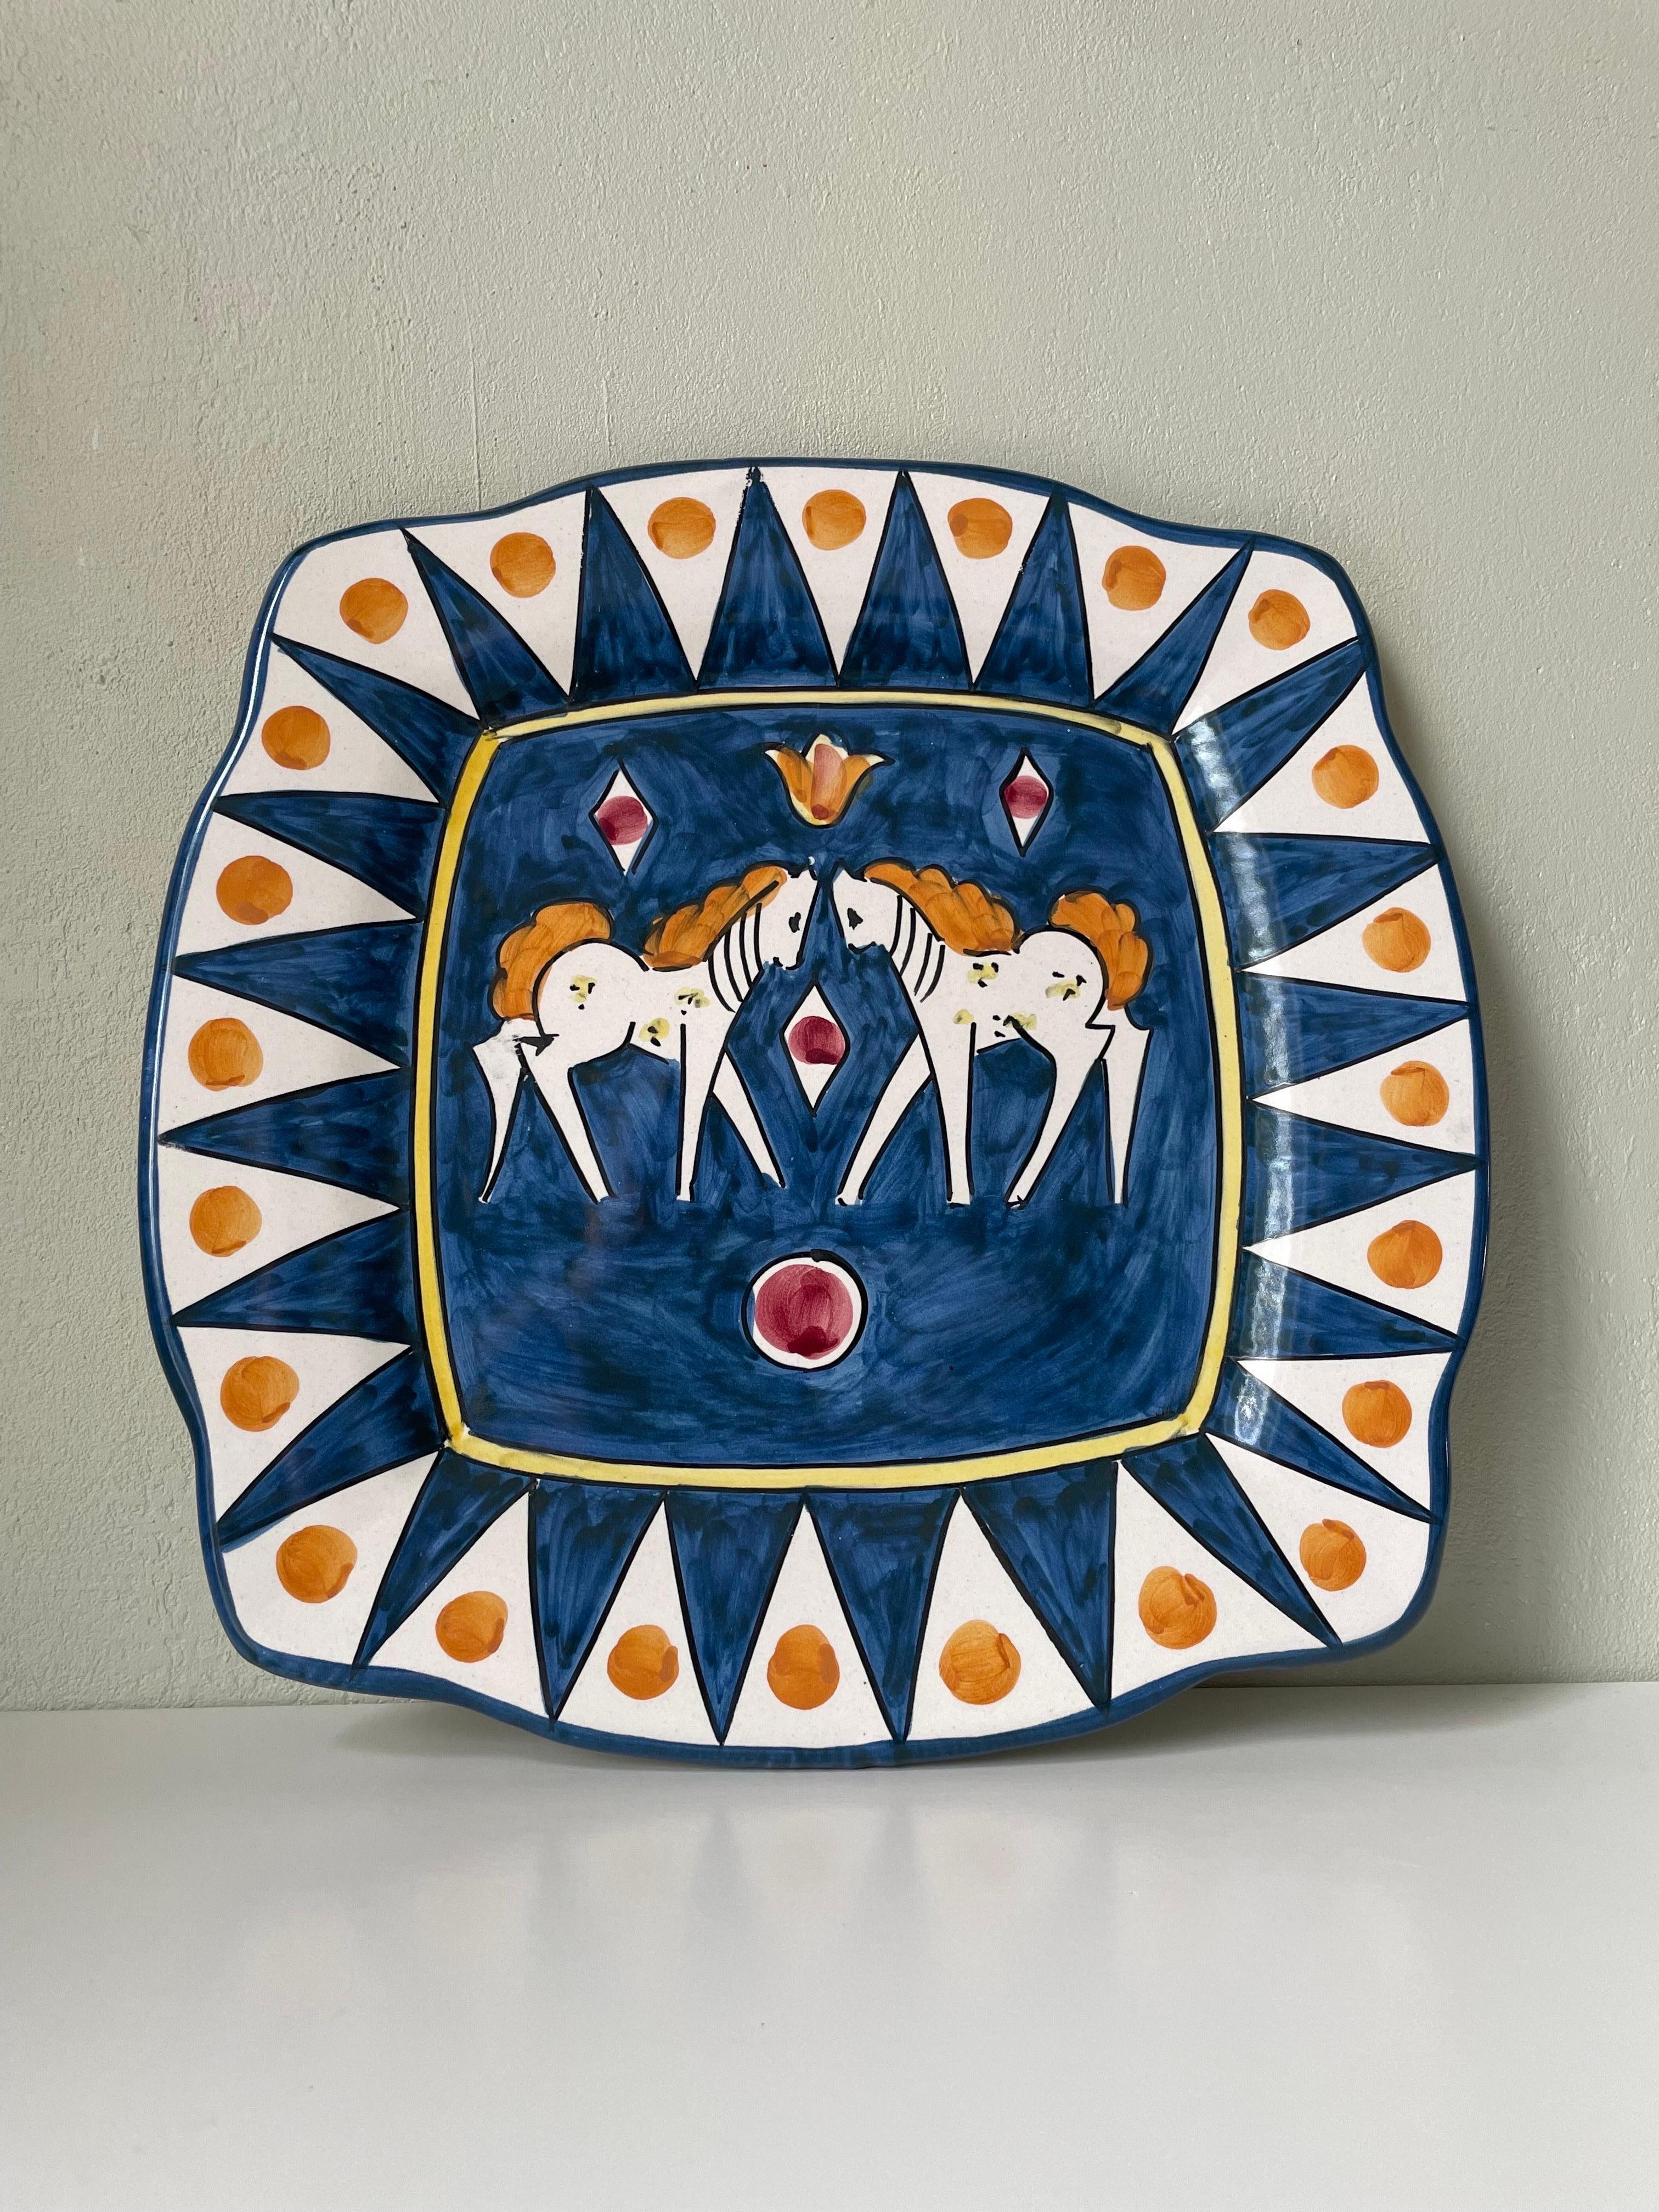 Hand-painted Italian modern soft cornered square shaped decorative dish, wall plate or center piece. Two white horses with orange manes and tails at the center. Crisp white and royal blue background and triangular decor with yellow and black lines